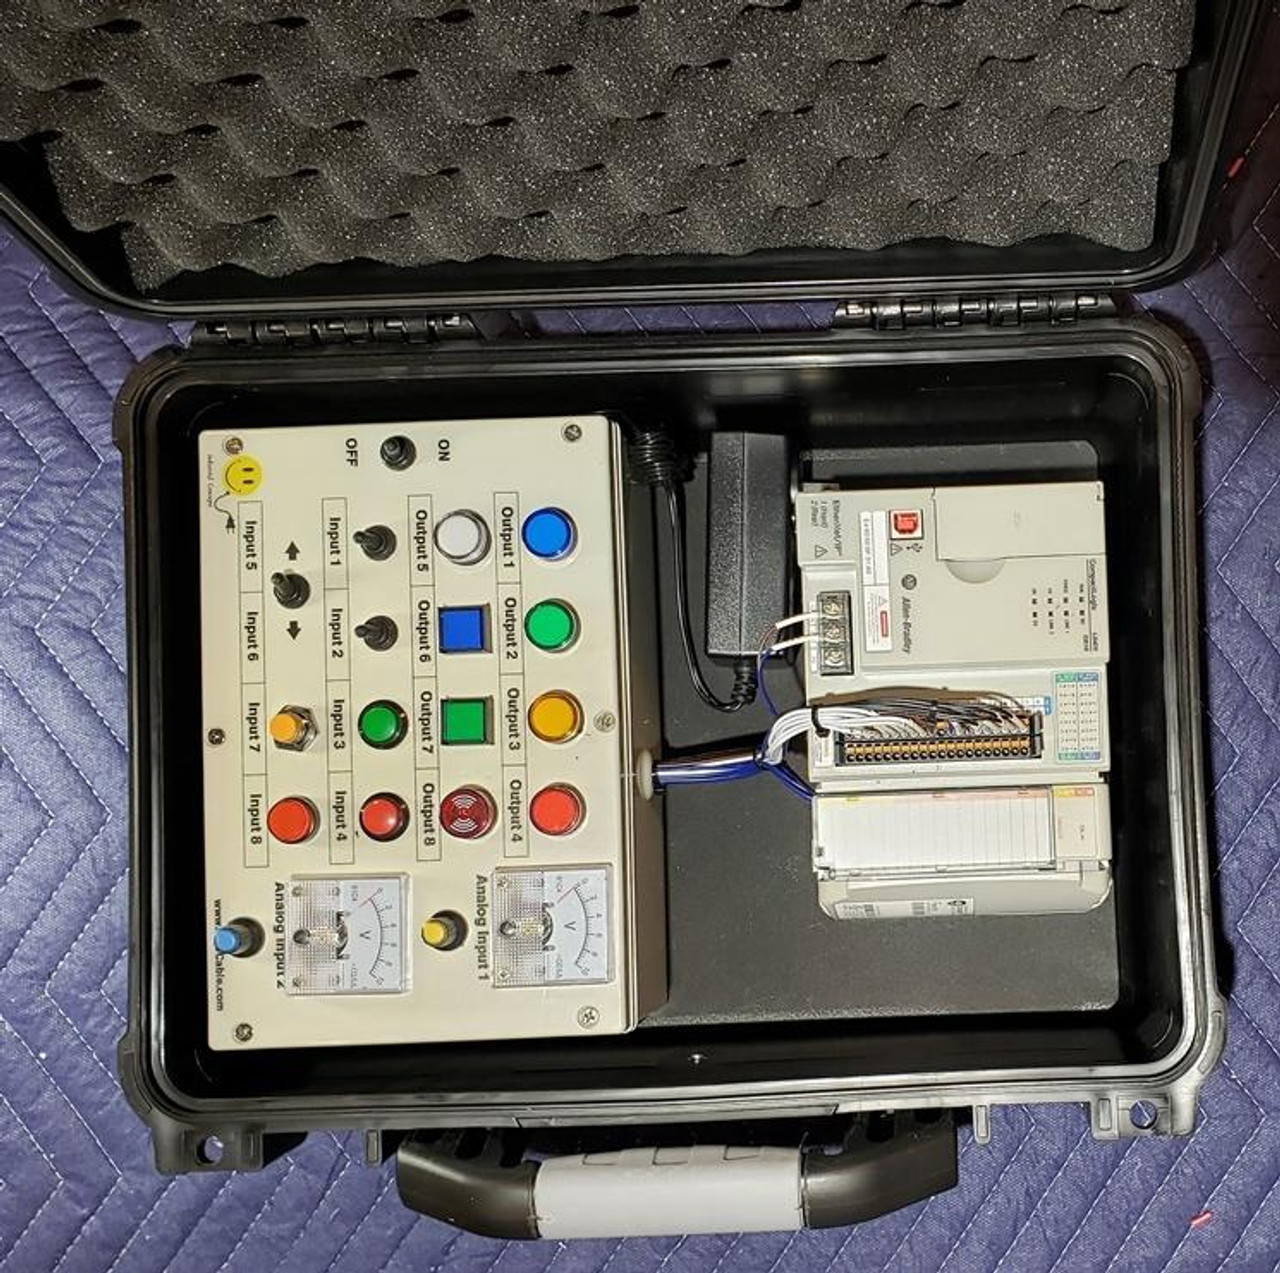 Large Hard Protective Lockable Case for PLC Trainer, Electrical Meter, Camera 14x10x6